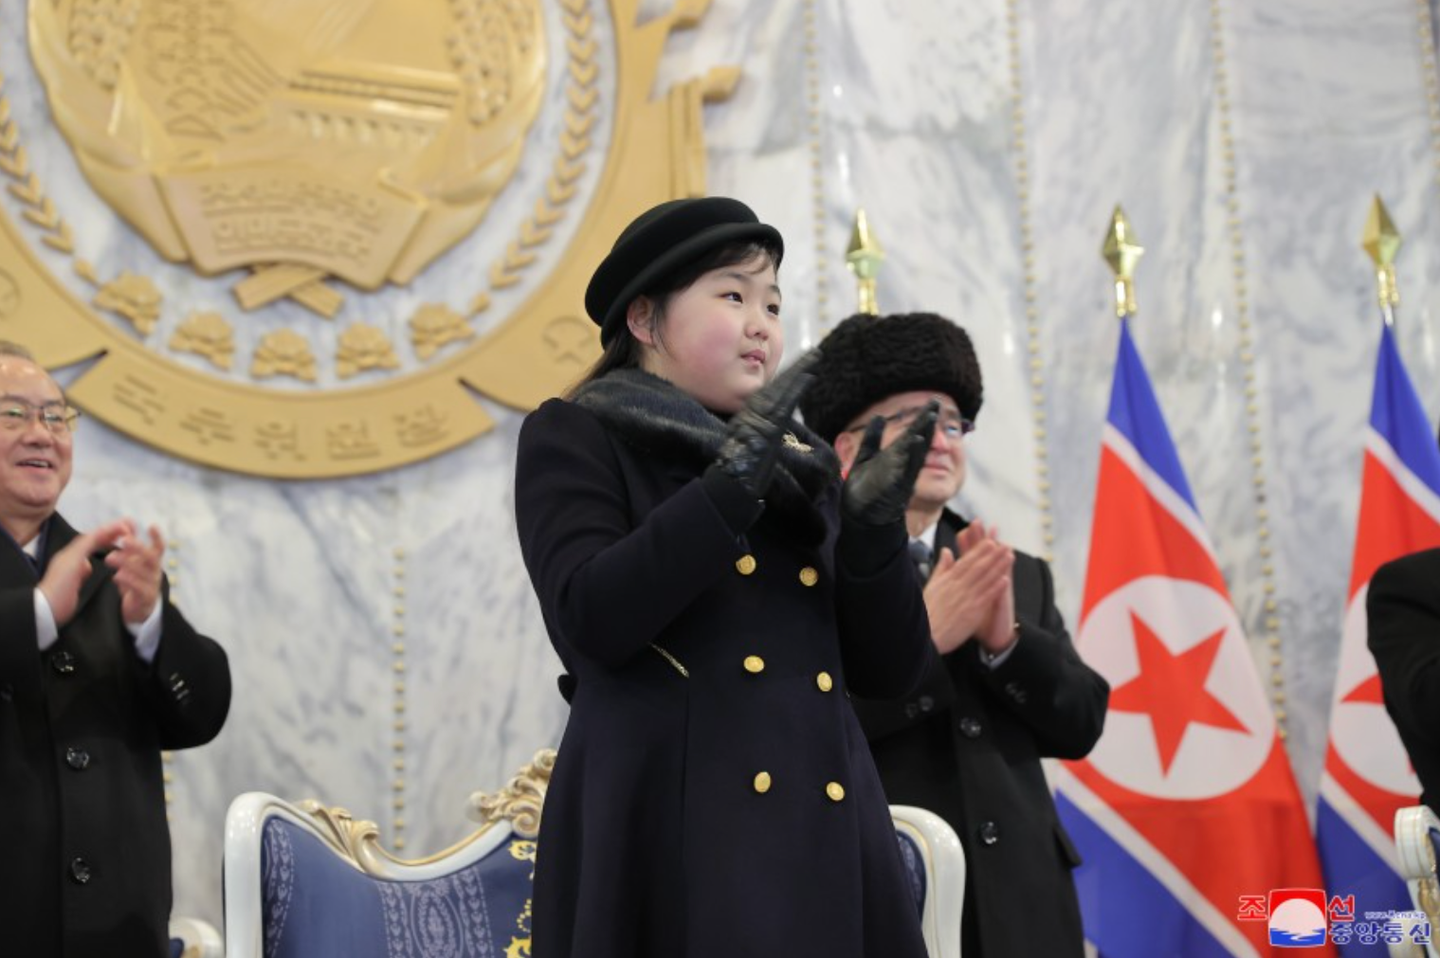 Ju Ae, who is around 9 years old, and believed to be Kim’s second child, visited a barracks and attended a banquet to mark the 75th anniversary of the founding of the Korean People’s Army. <em>KCNA</em>